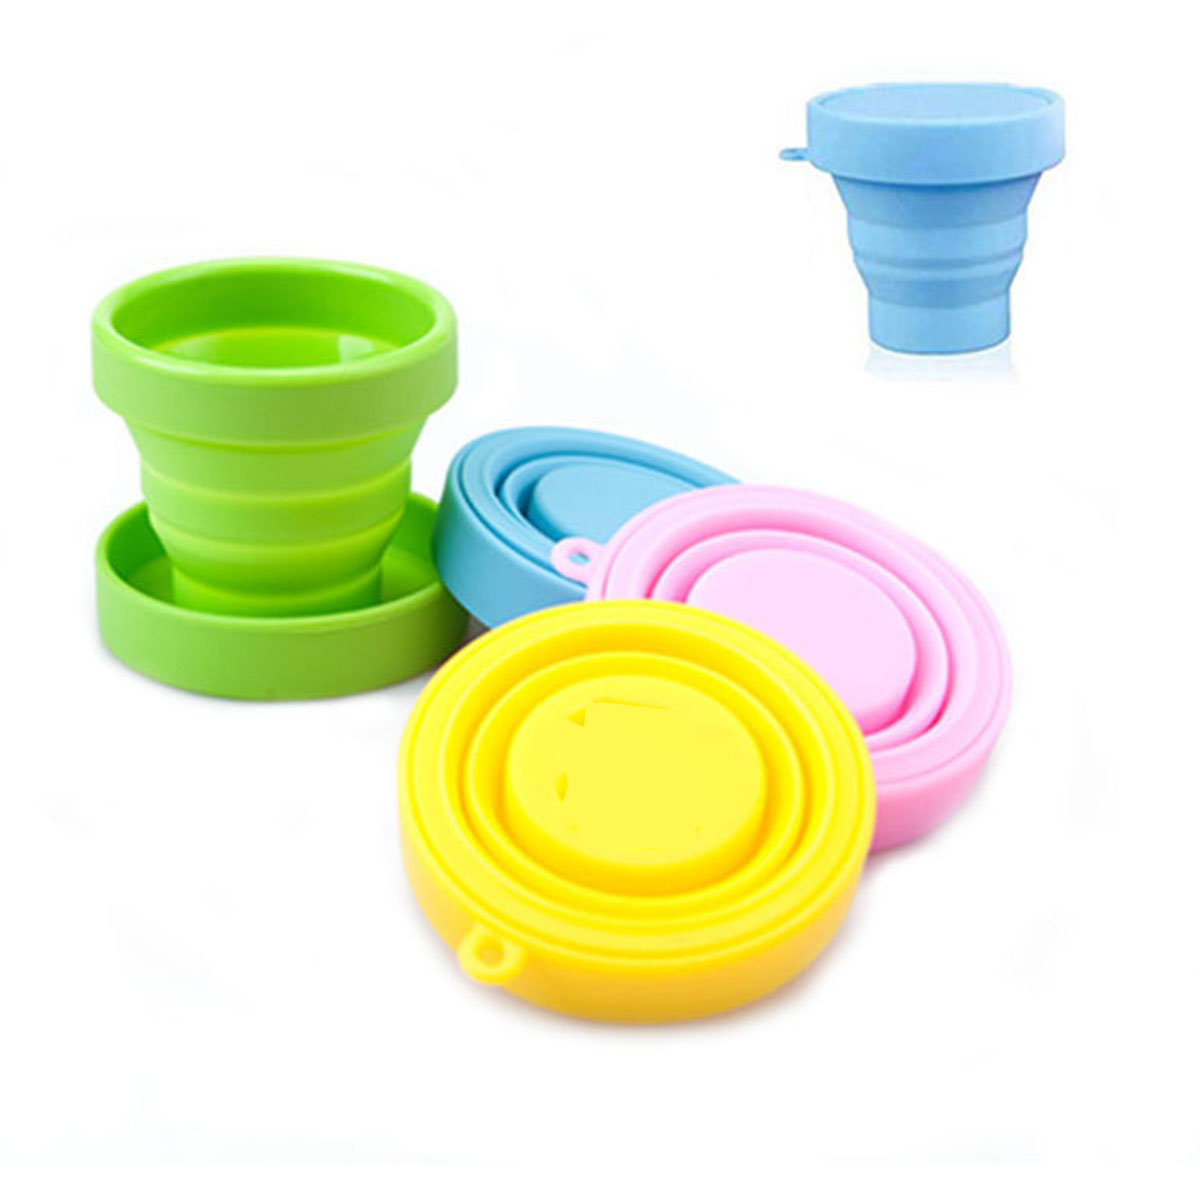 GL-ABB1001 Silicone Collapsible Cup with Cover